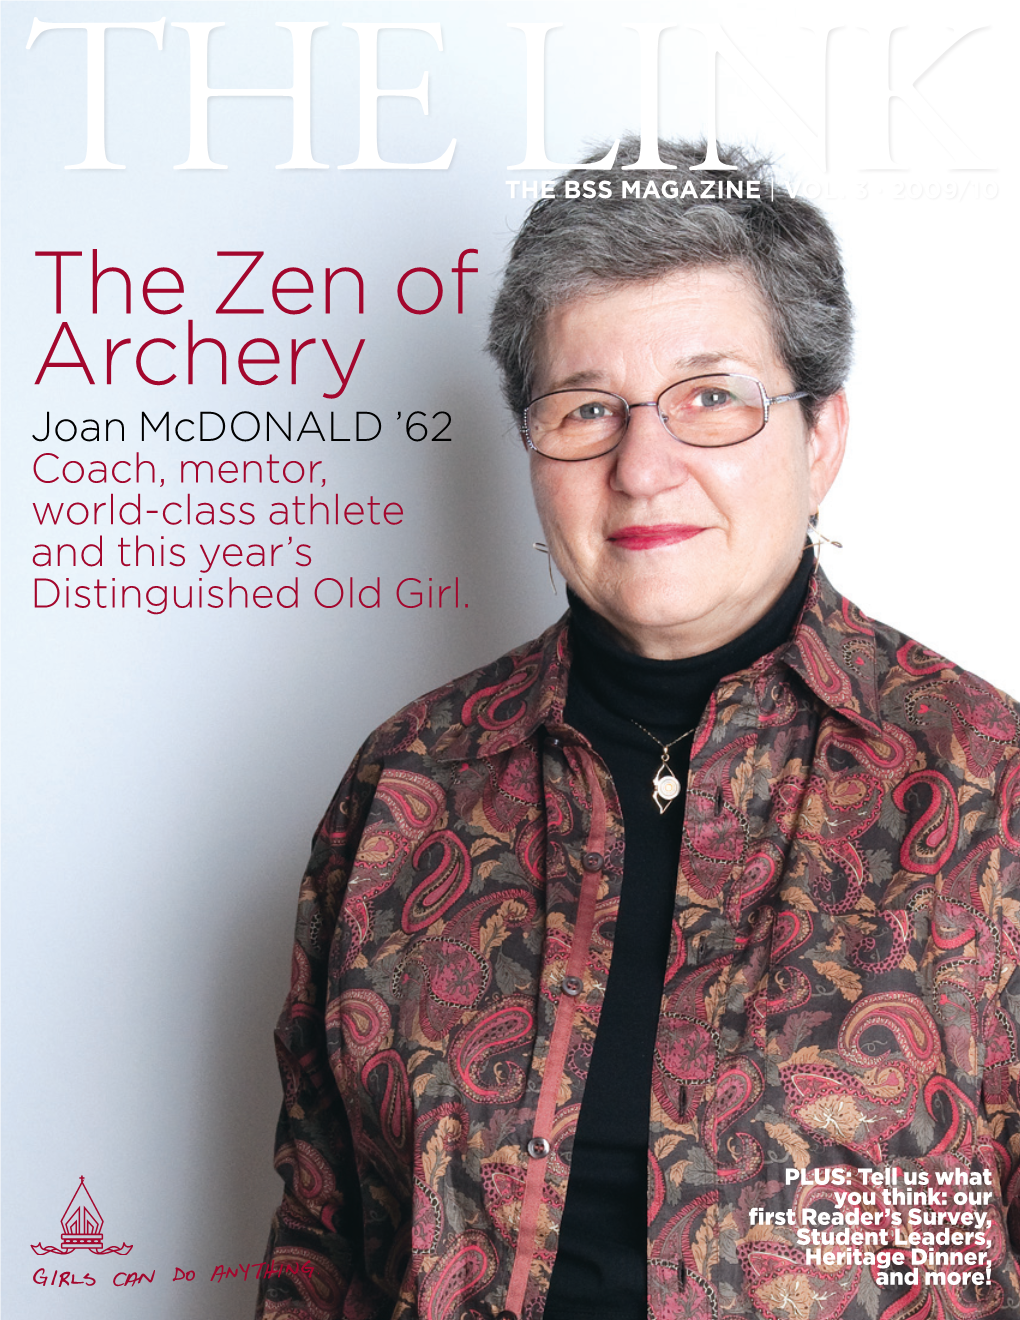 The Zen of Archery Joan Mcdonald ’62 Coach, Mentor, World-Class Athlete and This Year’S Distinguished Old Girl